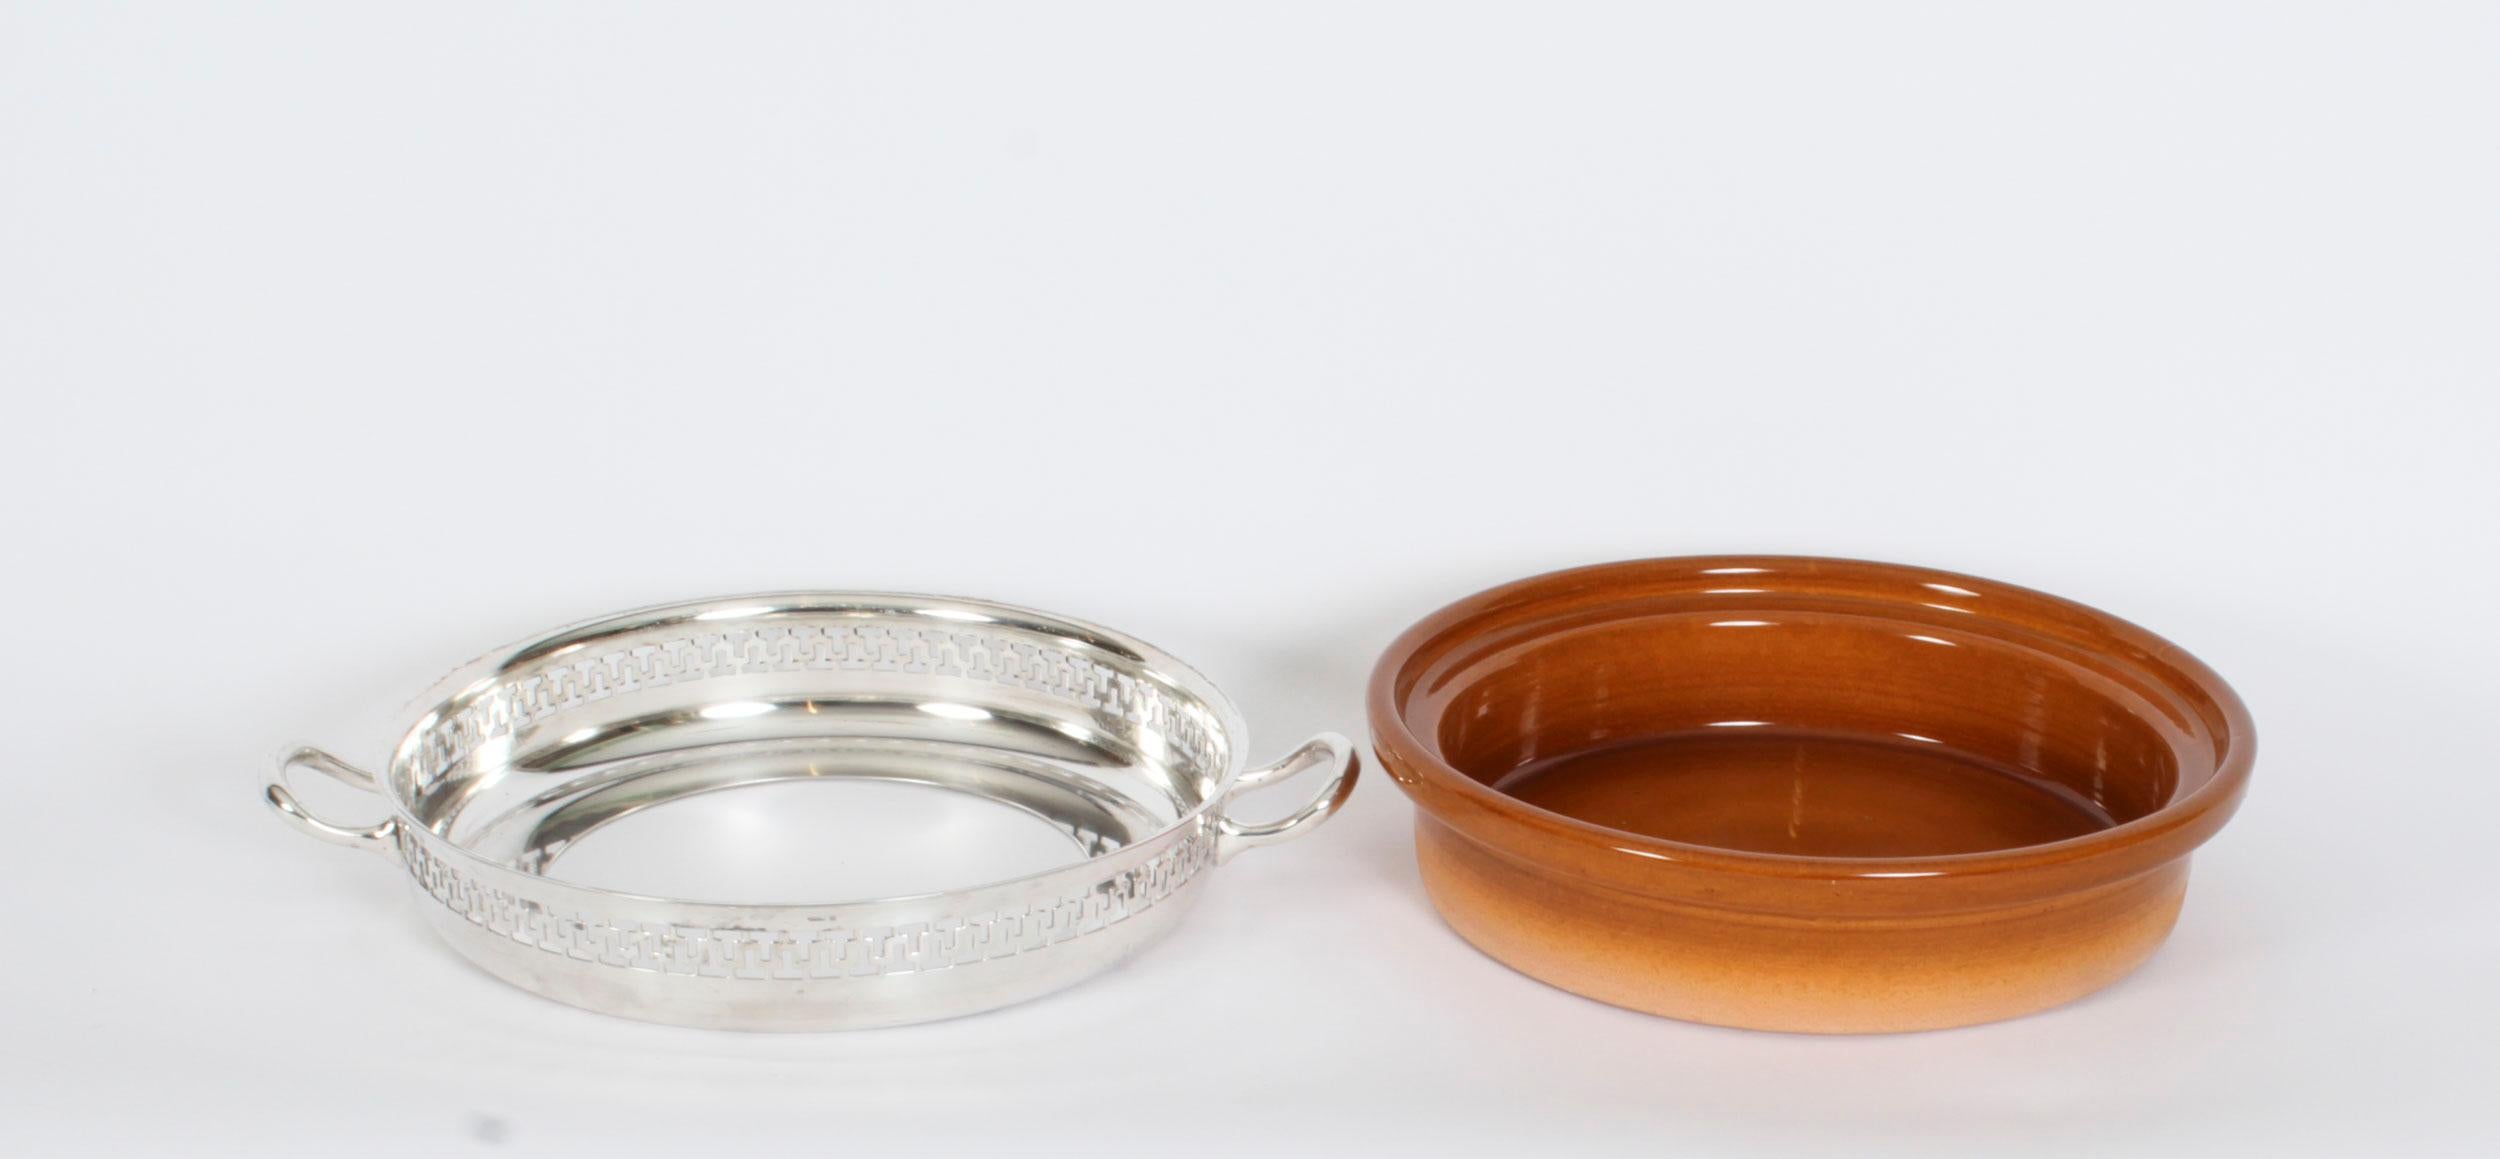 Antique Silver Plate and Terracotta Serving Dish by Wiskemann, 1920s 4